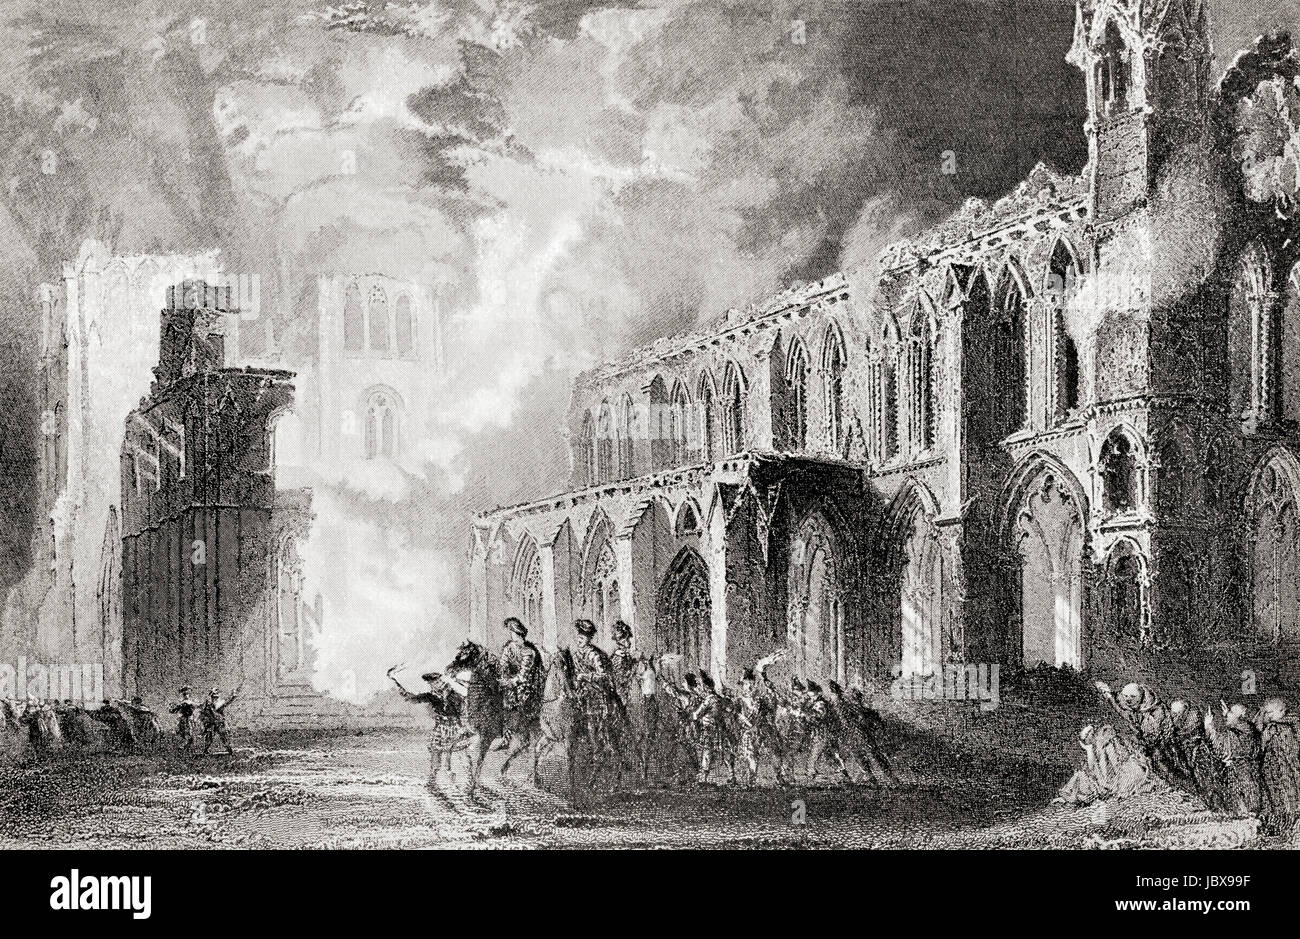 The destruction of Elgin Cathedral, Moray, Scotland in 1390 by Robert III's brother Alexander Stewart, Earl of Buchan, aka the Wolf of Badenoch.   From Hutchinson's History of the Nations, published 1915. Stock Photo